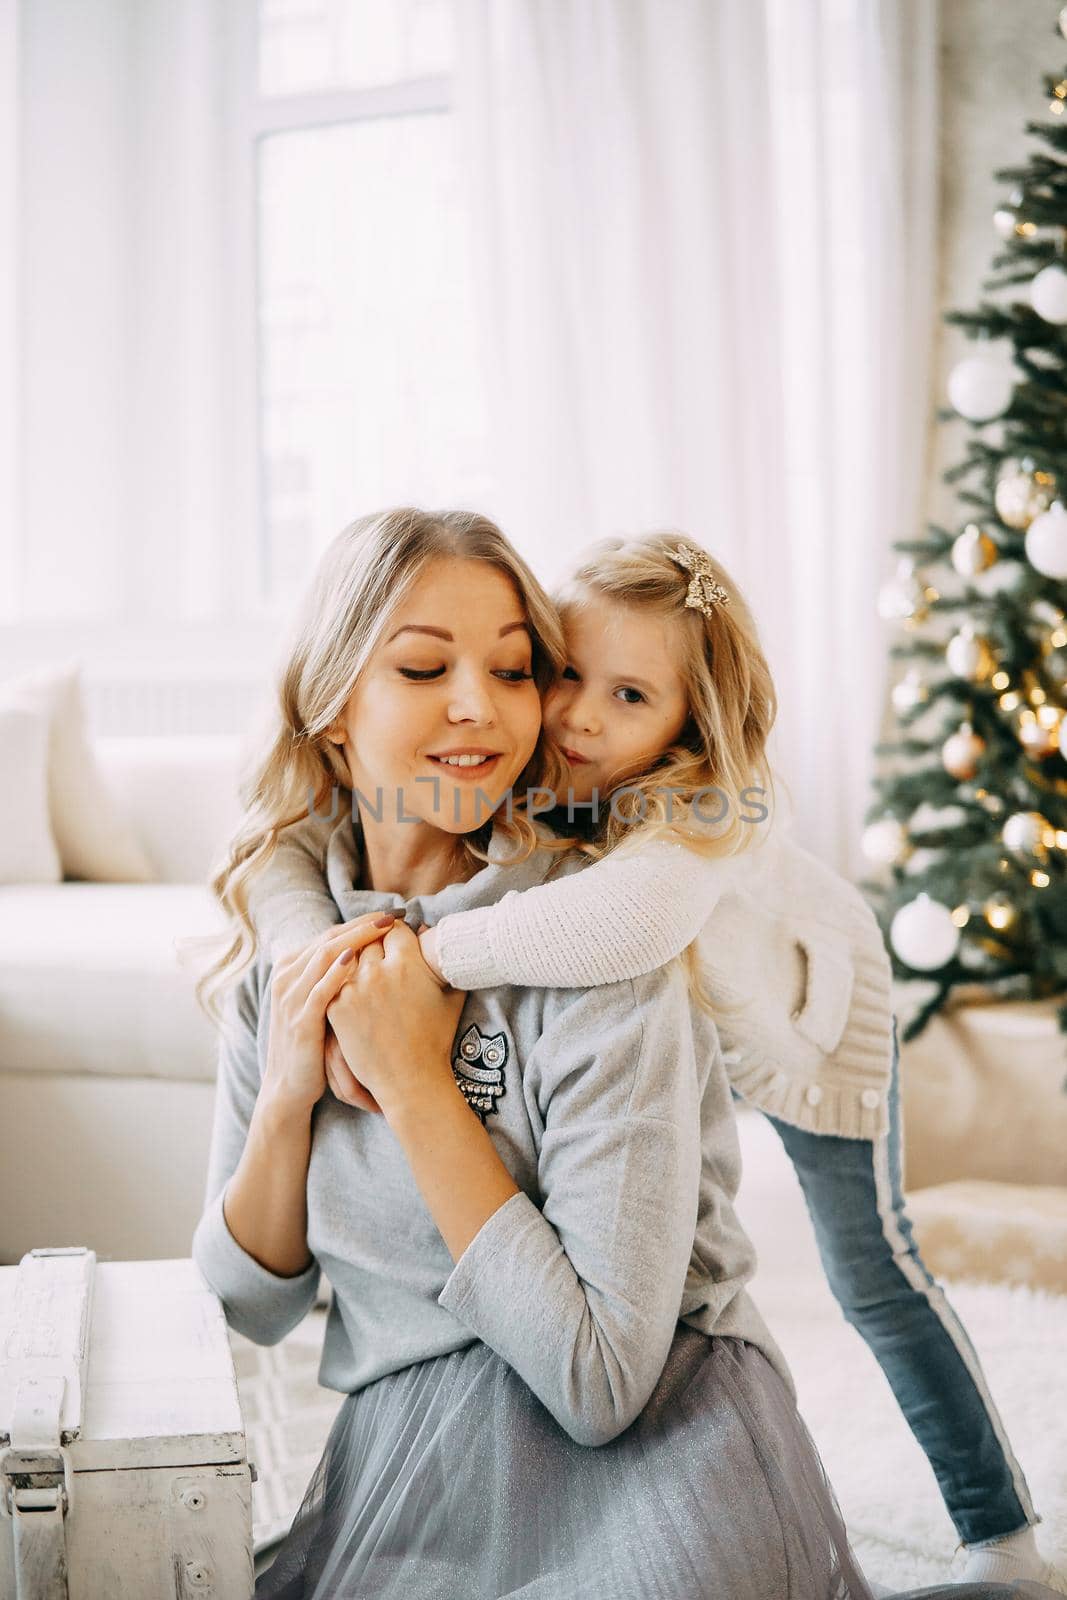 Happy family: mother and daughter. Family in a bright New Year's interior with a Christmas tree.